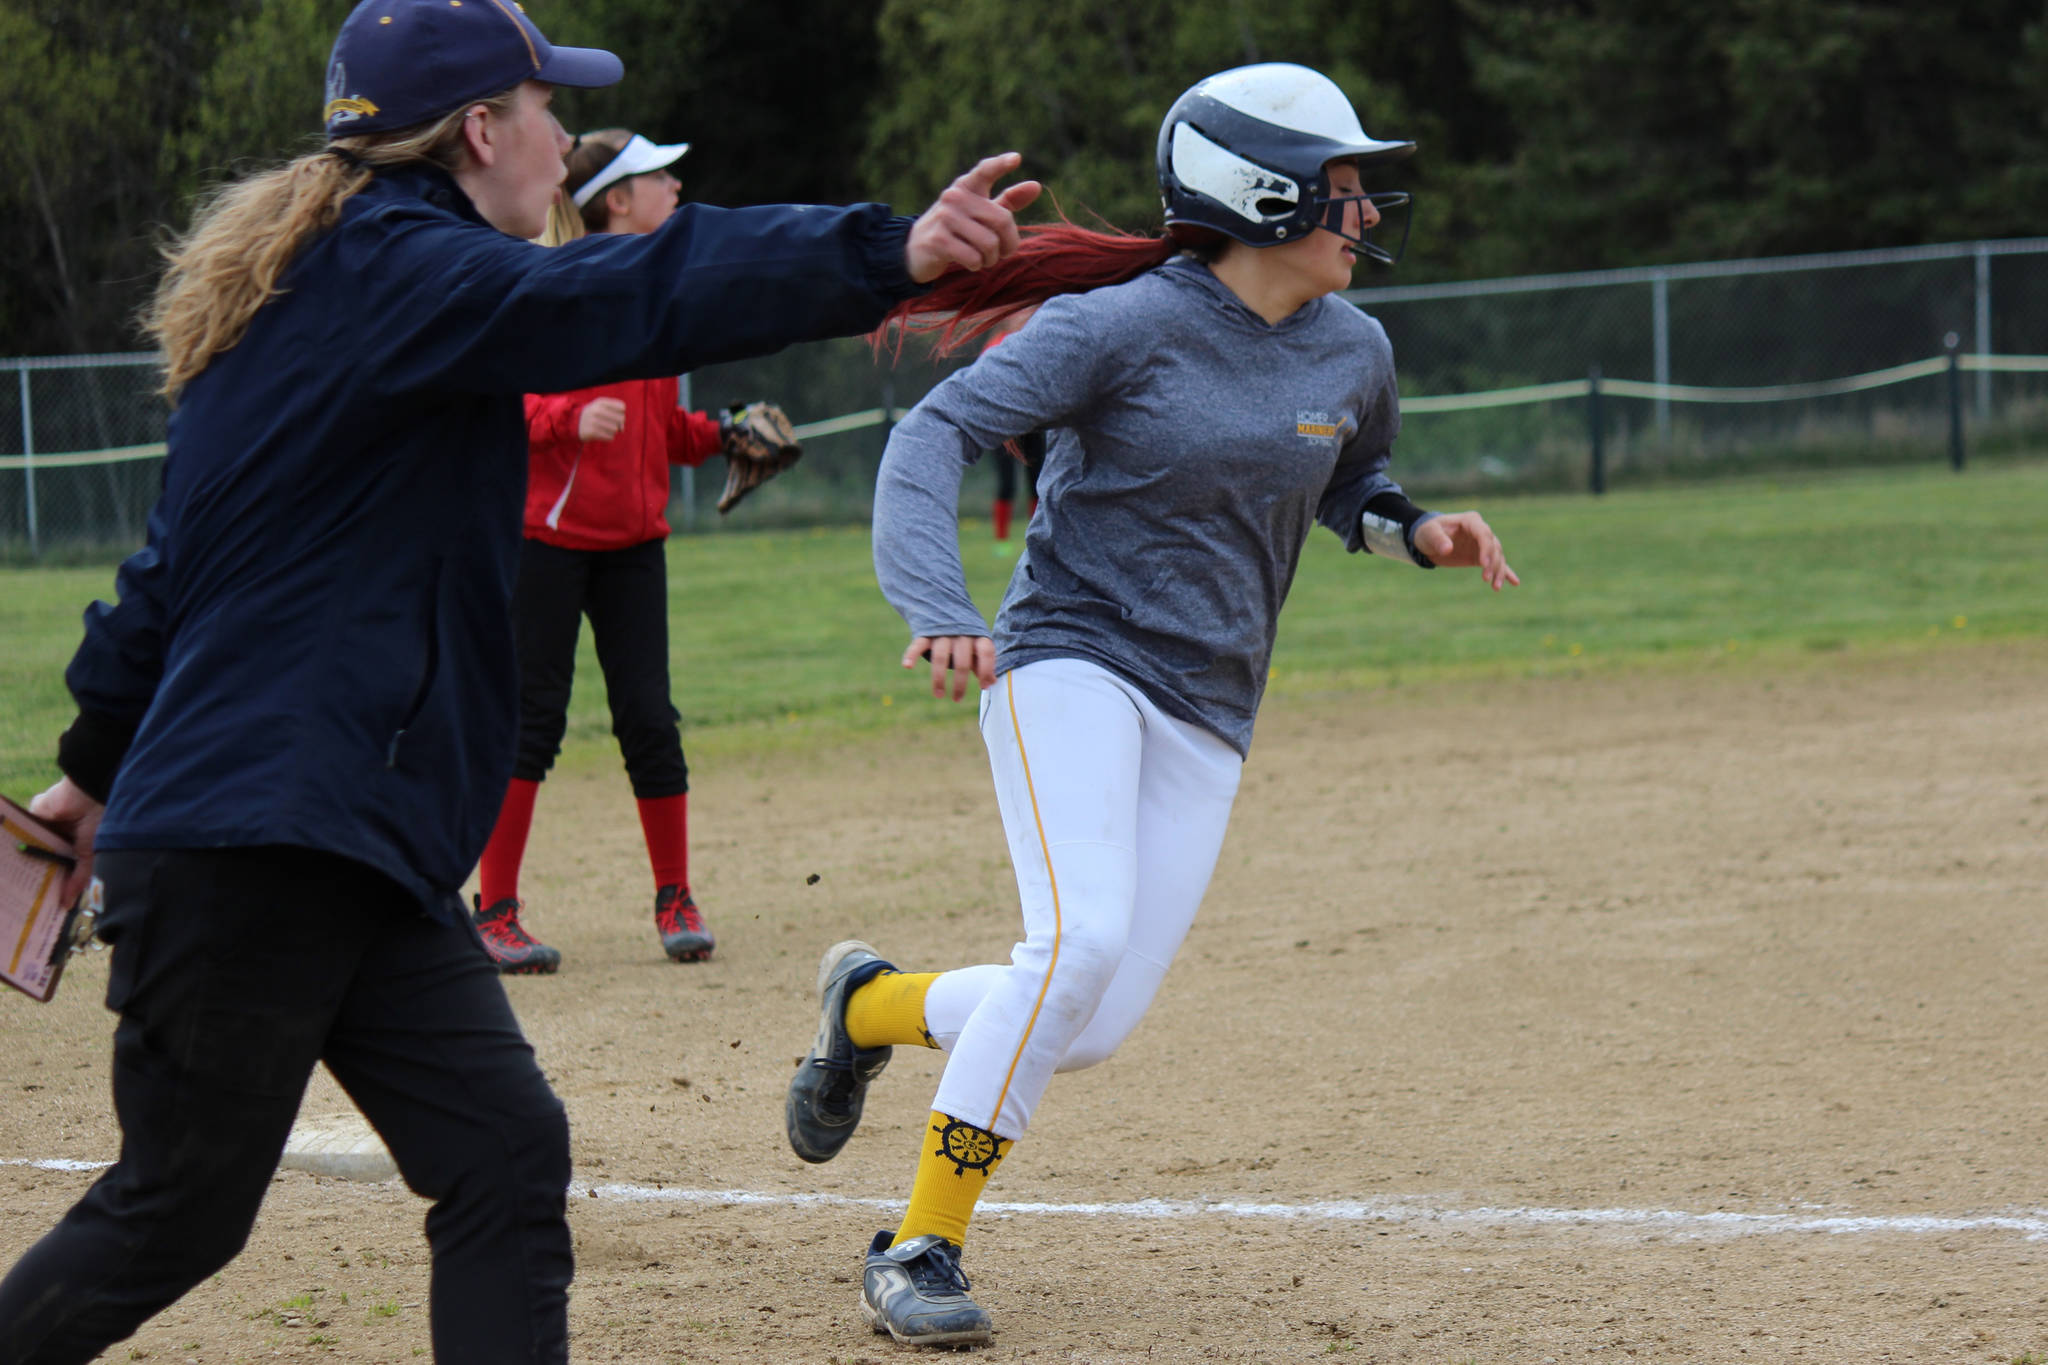 Mariner Haylee Owen rounds third base and keeps on going as Assistant Coach Hannah Zook directs her toward home plate.